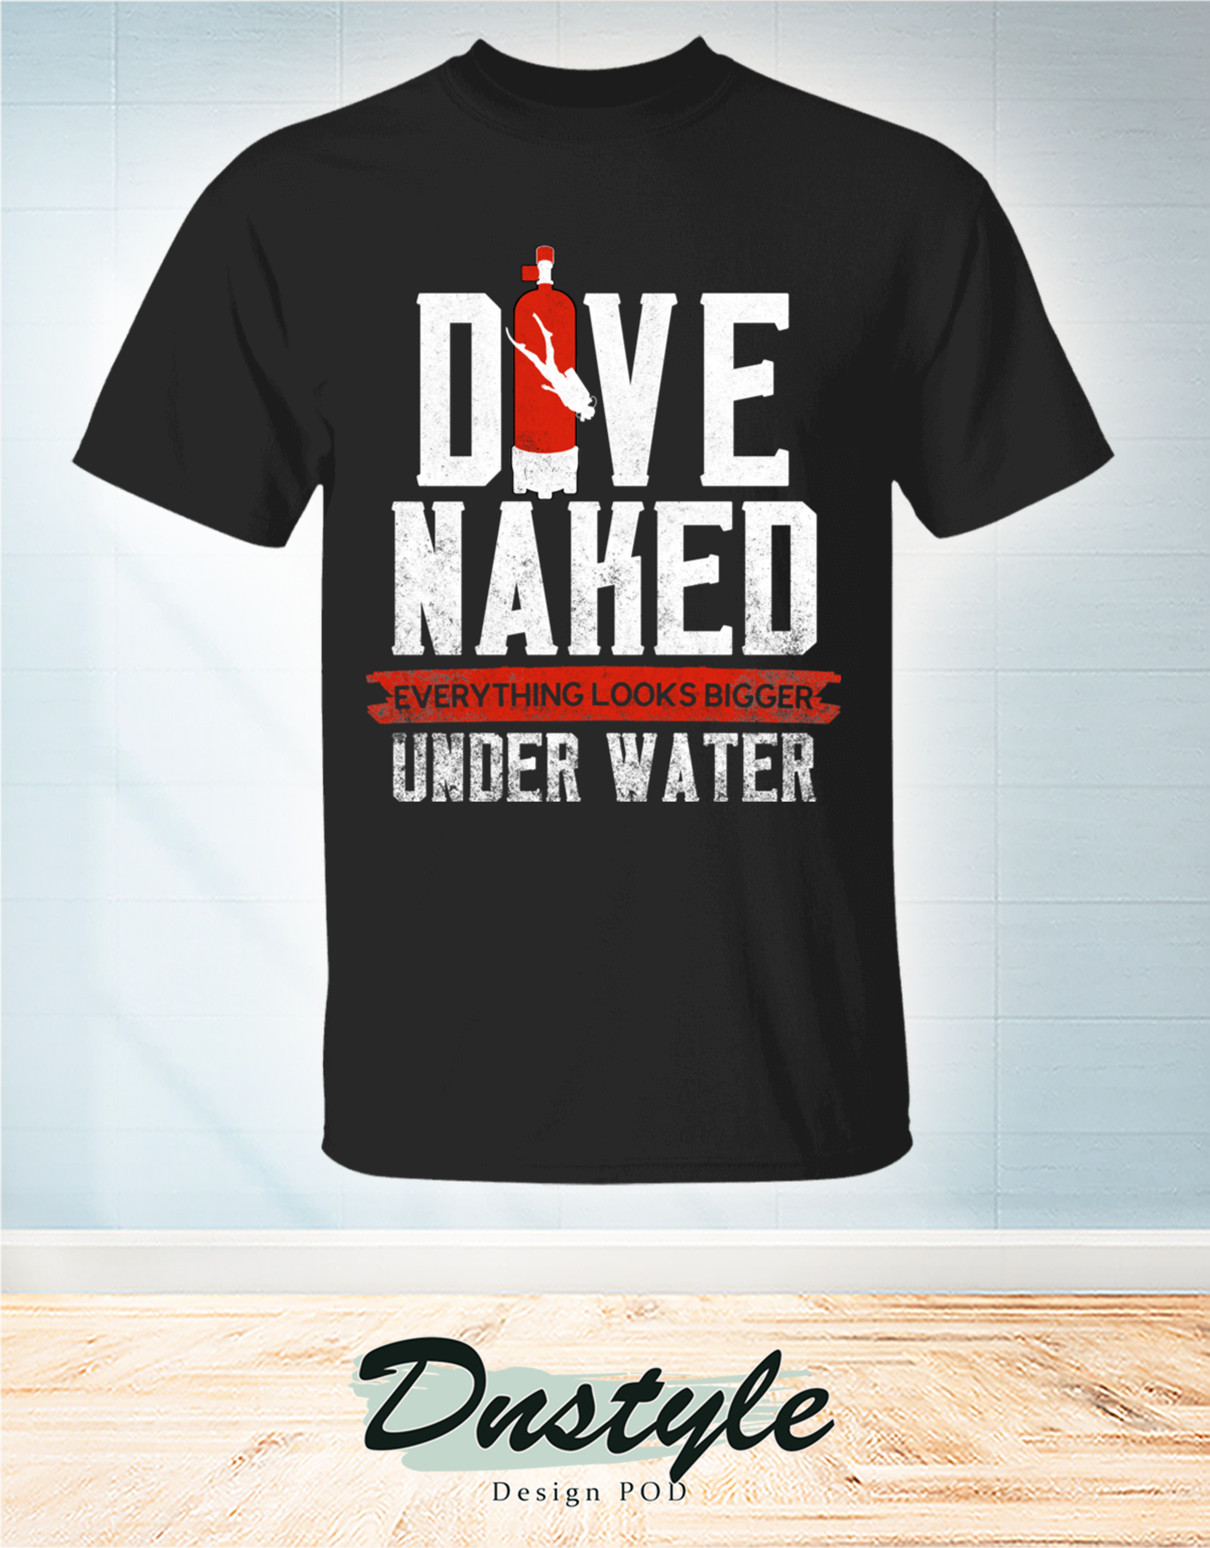 Dive naked everything look bigger under water t-shirt 2